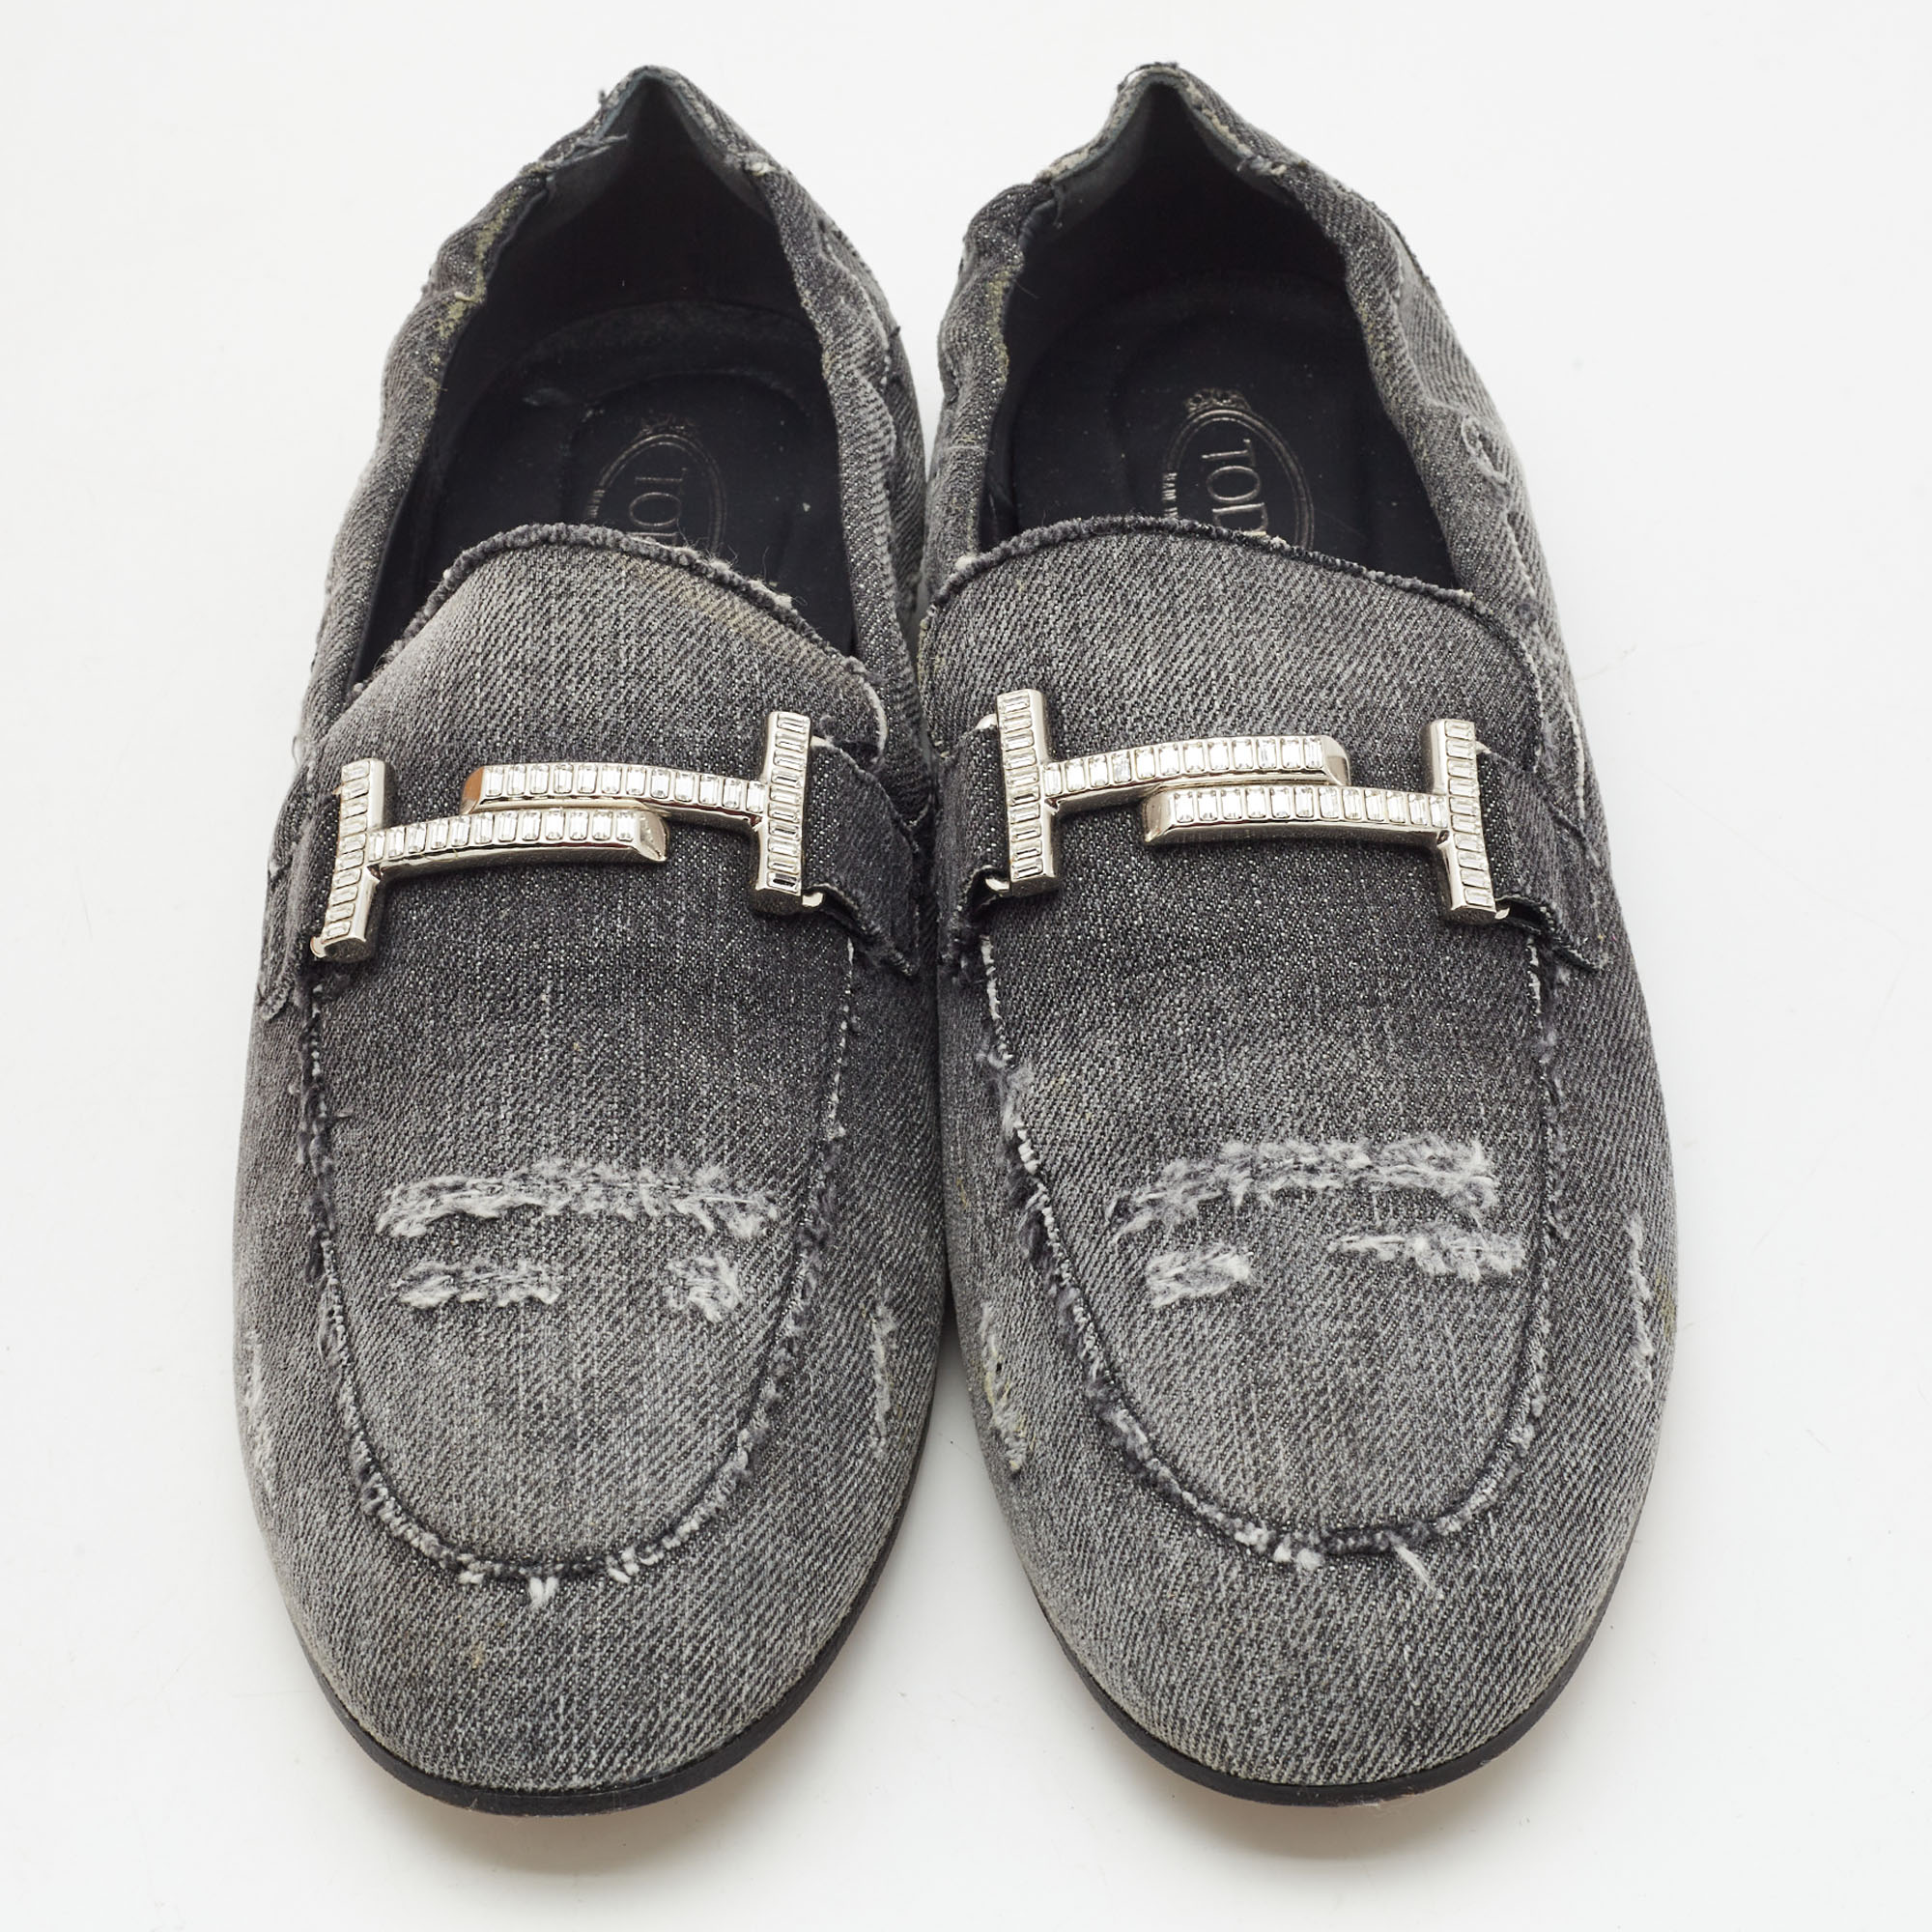 Tod's Dark Grey Denim Double T Crystal Embellished Loafers Size 41